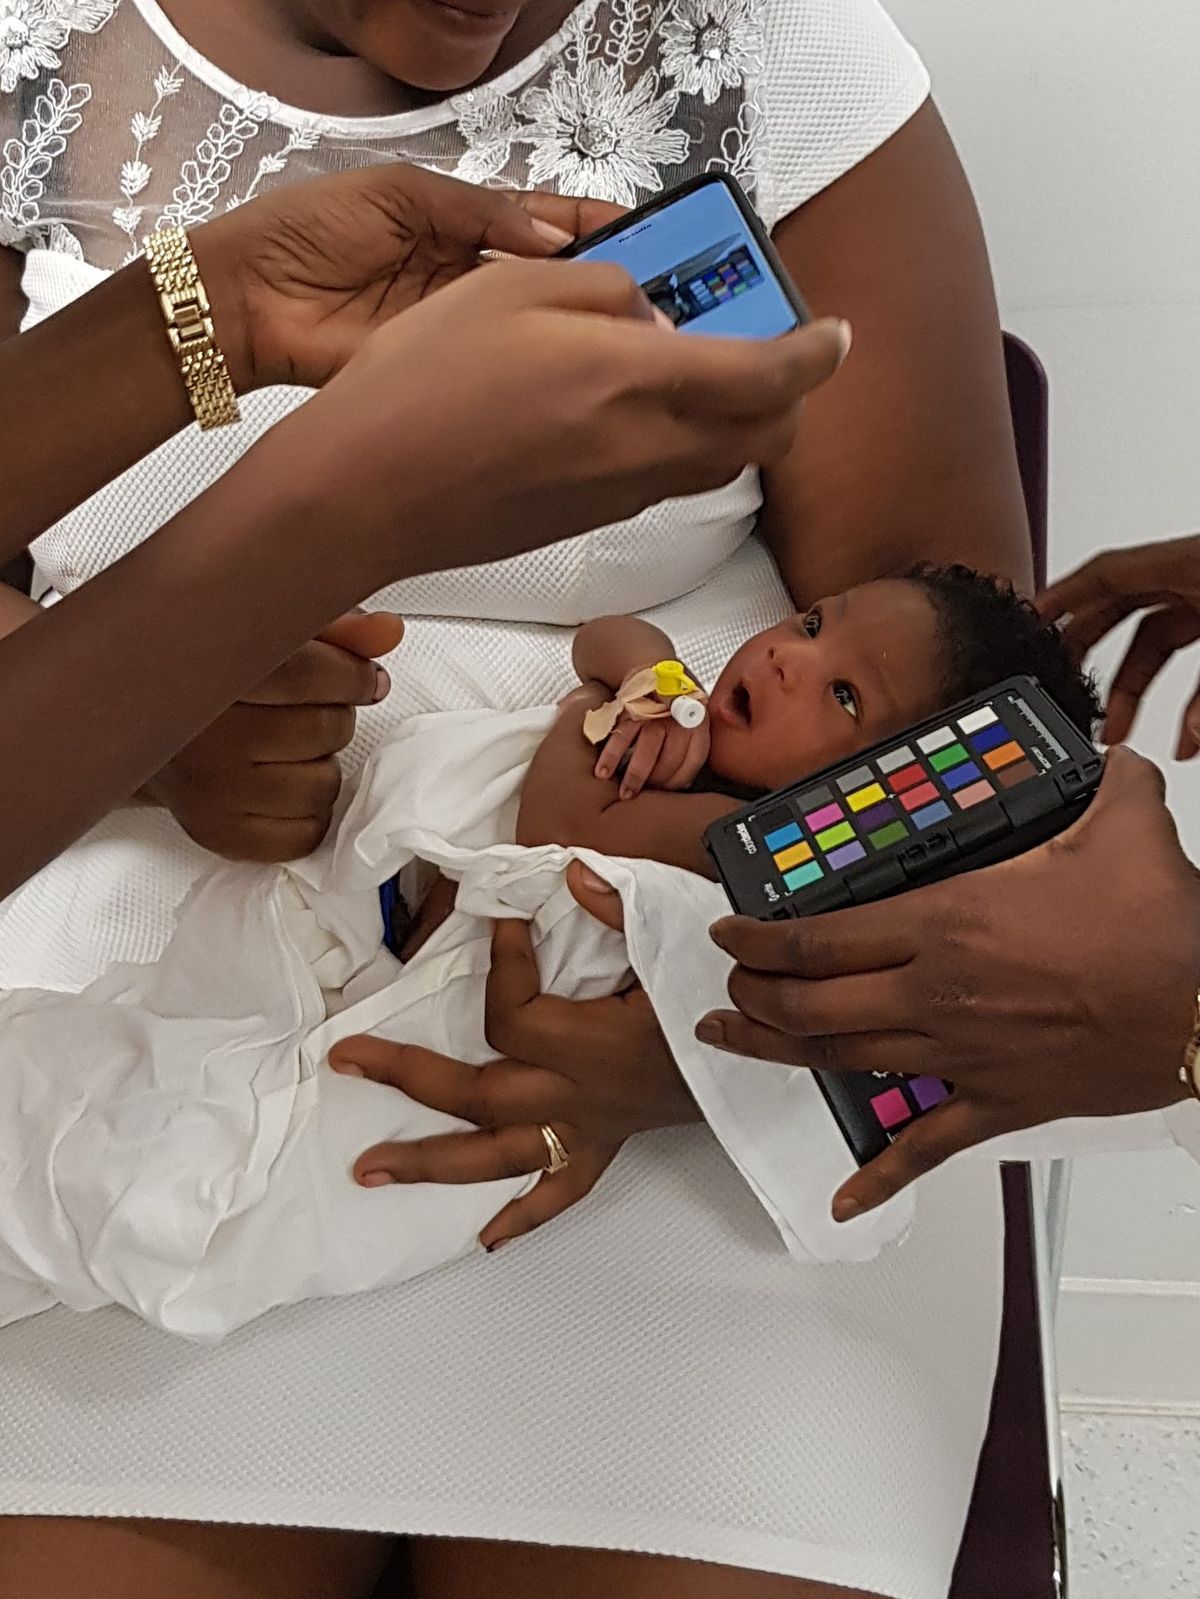 A photo of a mother wearing a white dress holding her baby. One person’s hands hold a color checker card next to the baby’s face while another person’s hands take a picture on a smartphone. 